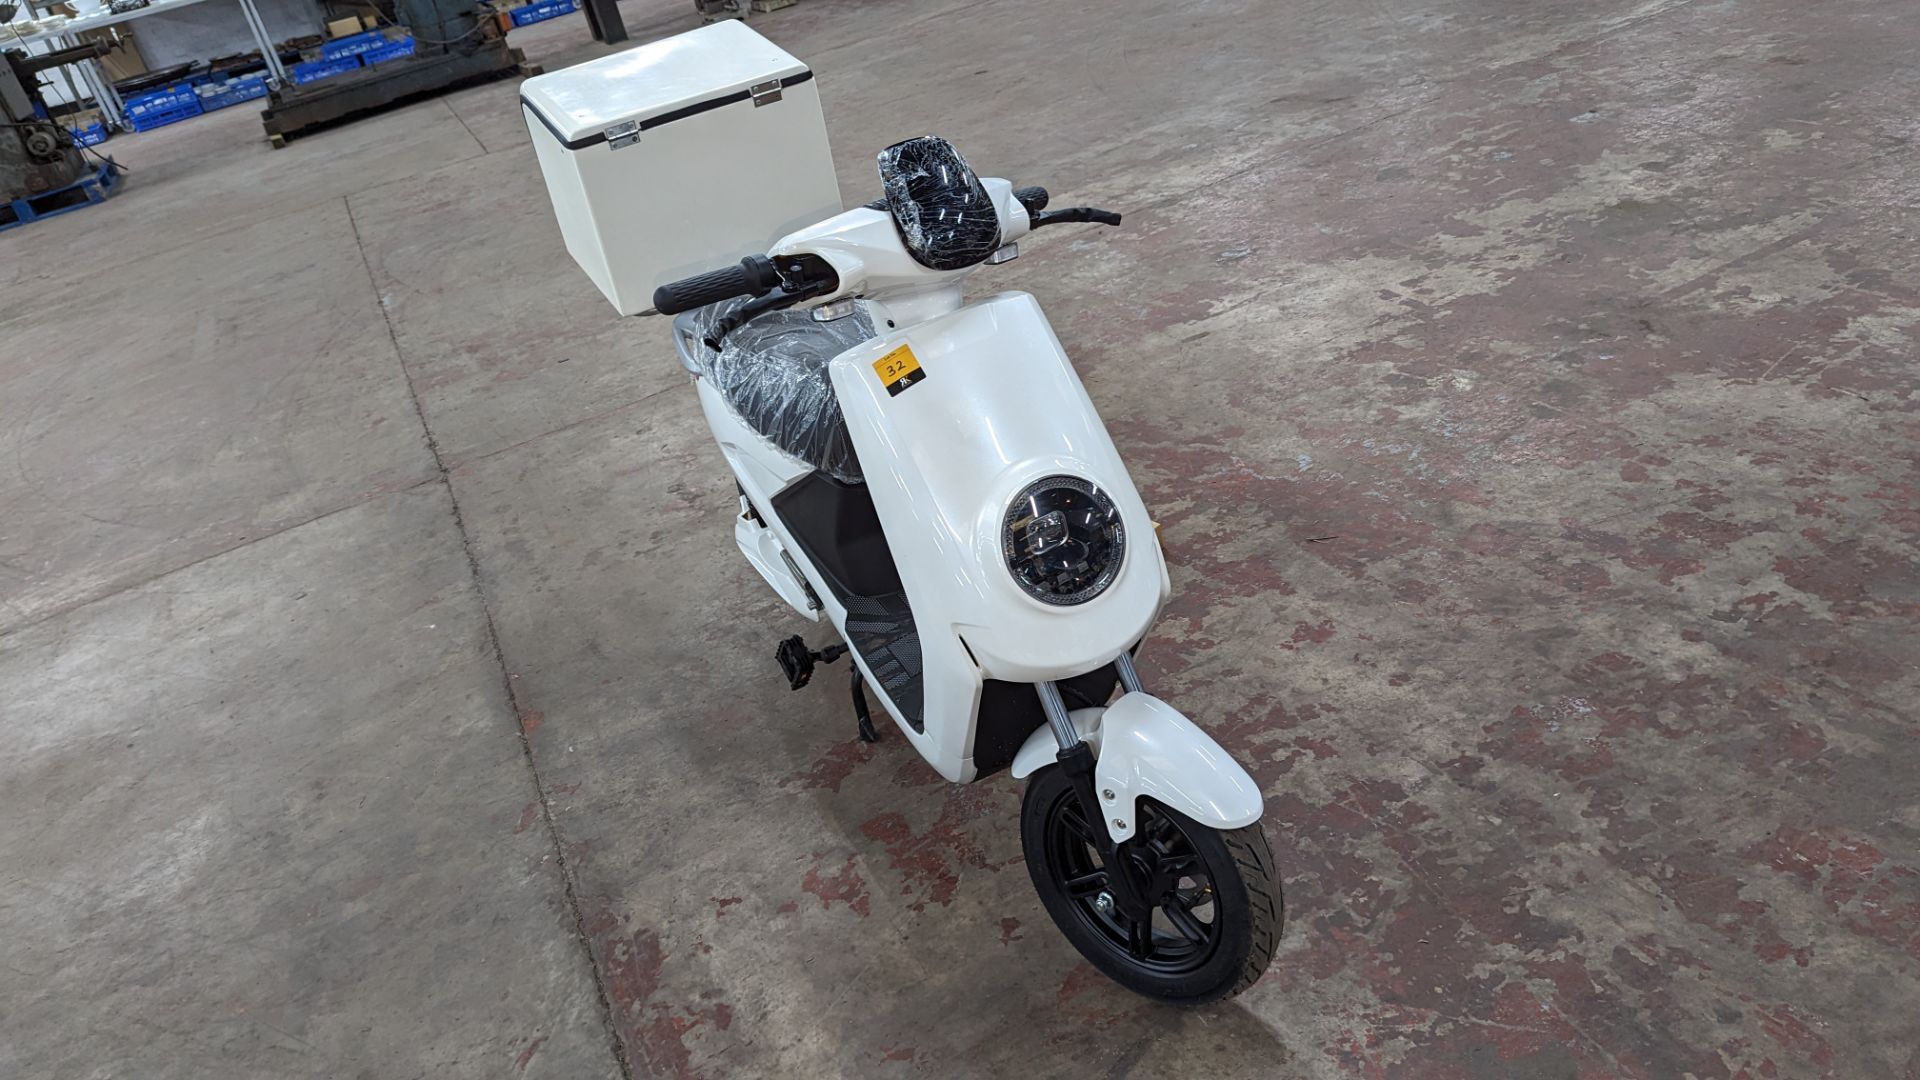 Model 18 Electric Bike: Zero (0) recorded miles, white body with black detailing, insulated box moun - Image 9 of 15